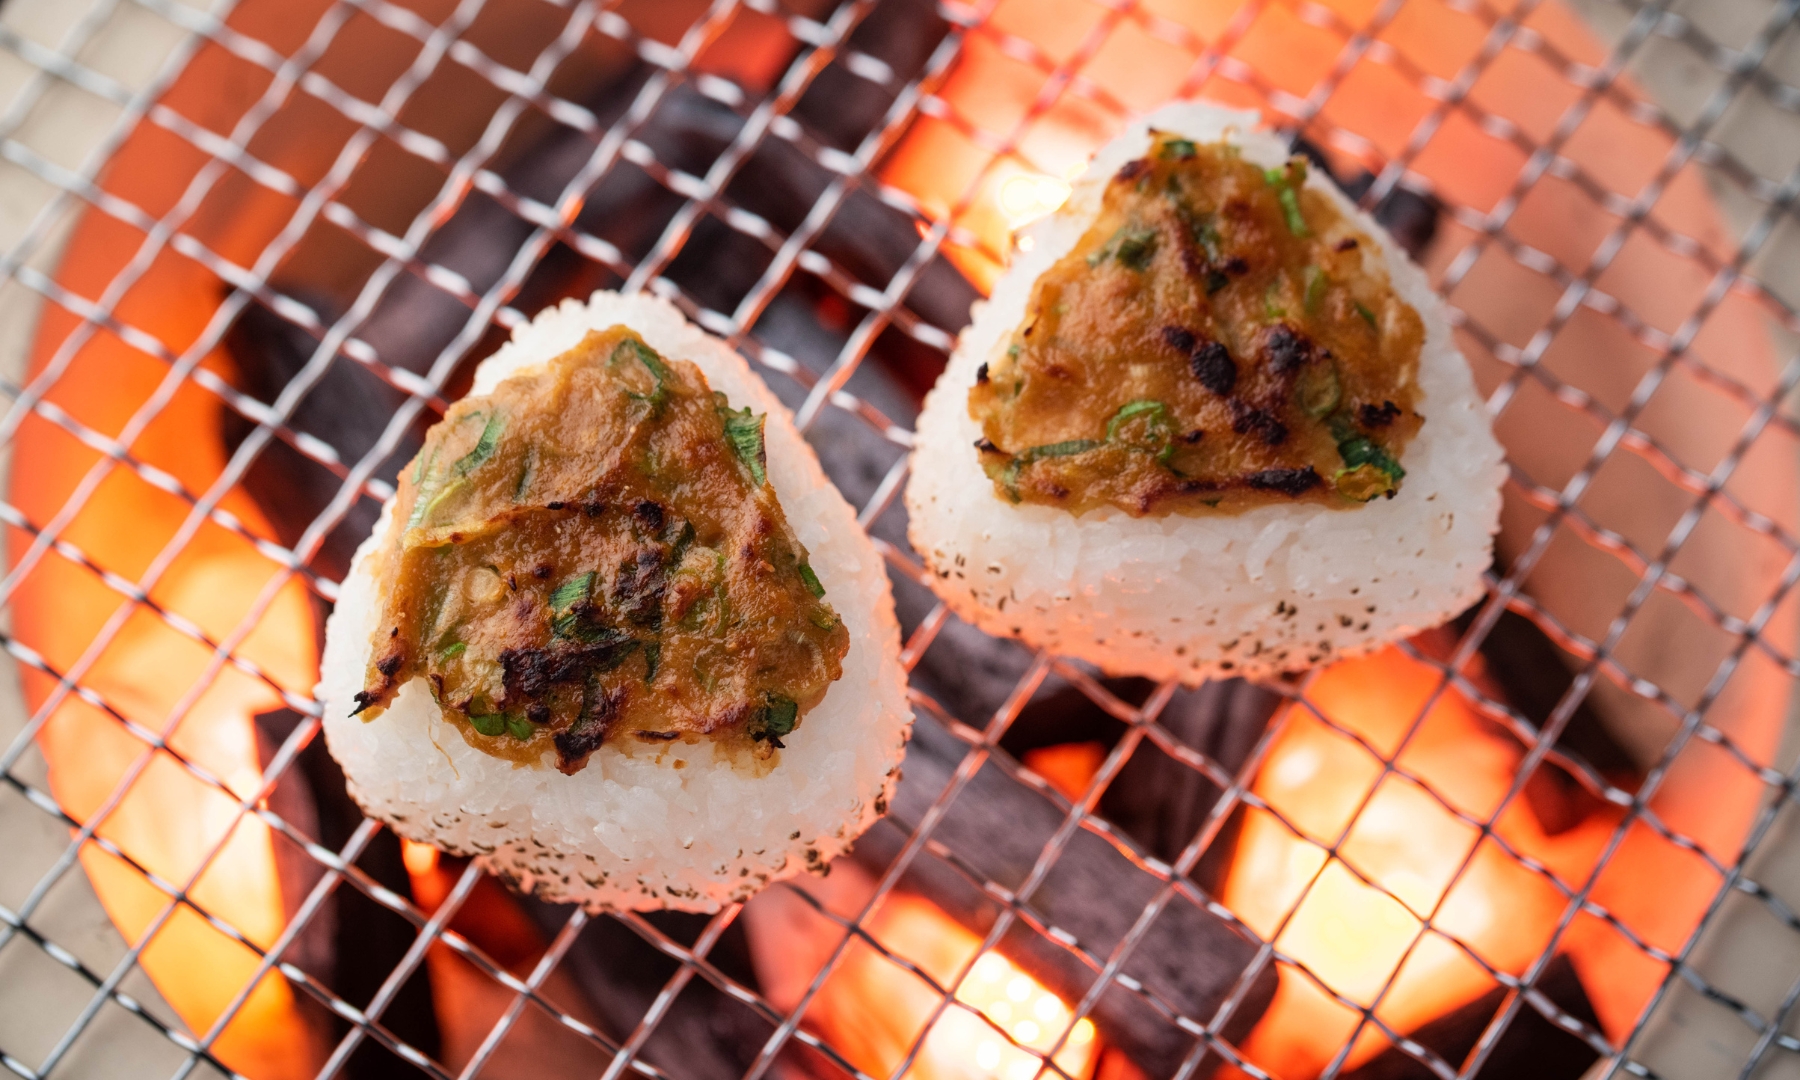 Yaki onigiri with miso topping being prepared on a grill